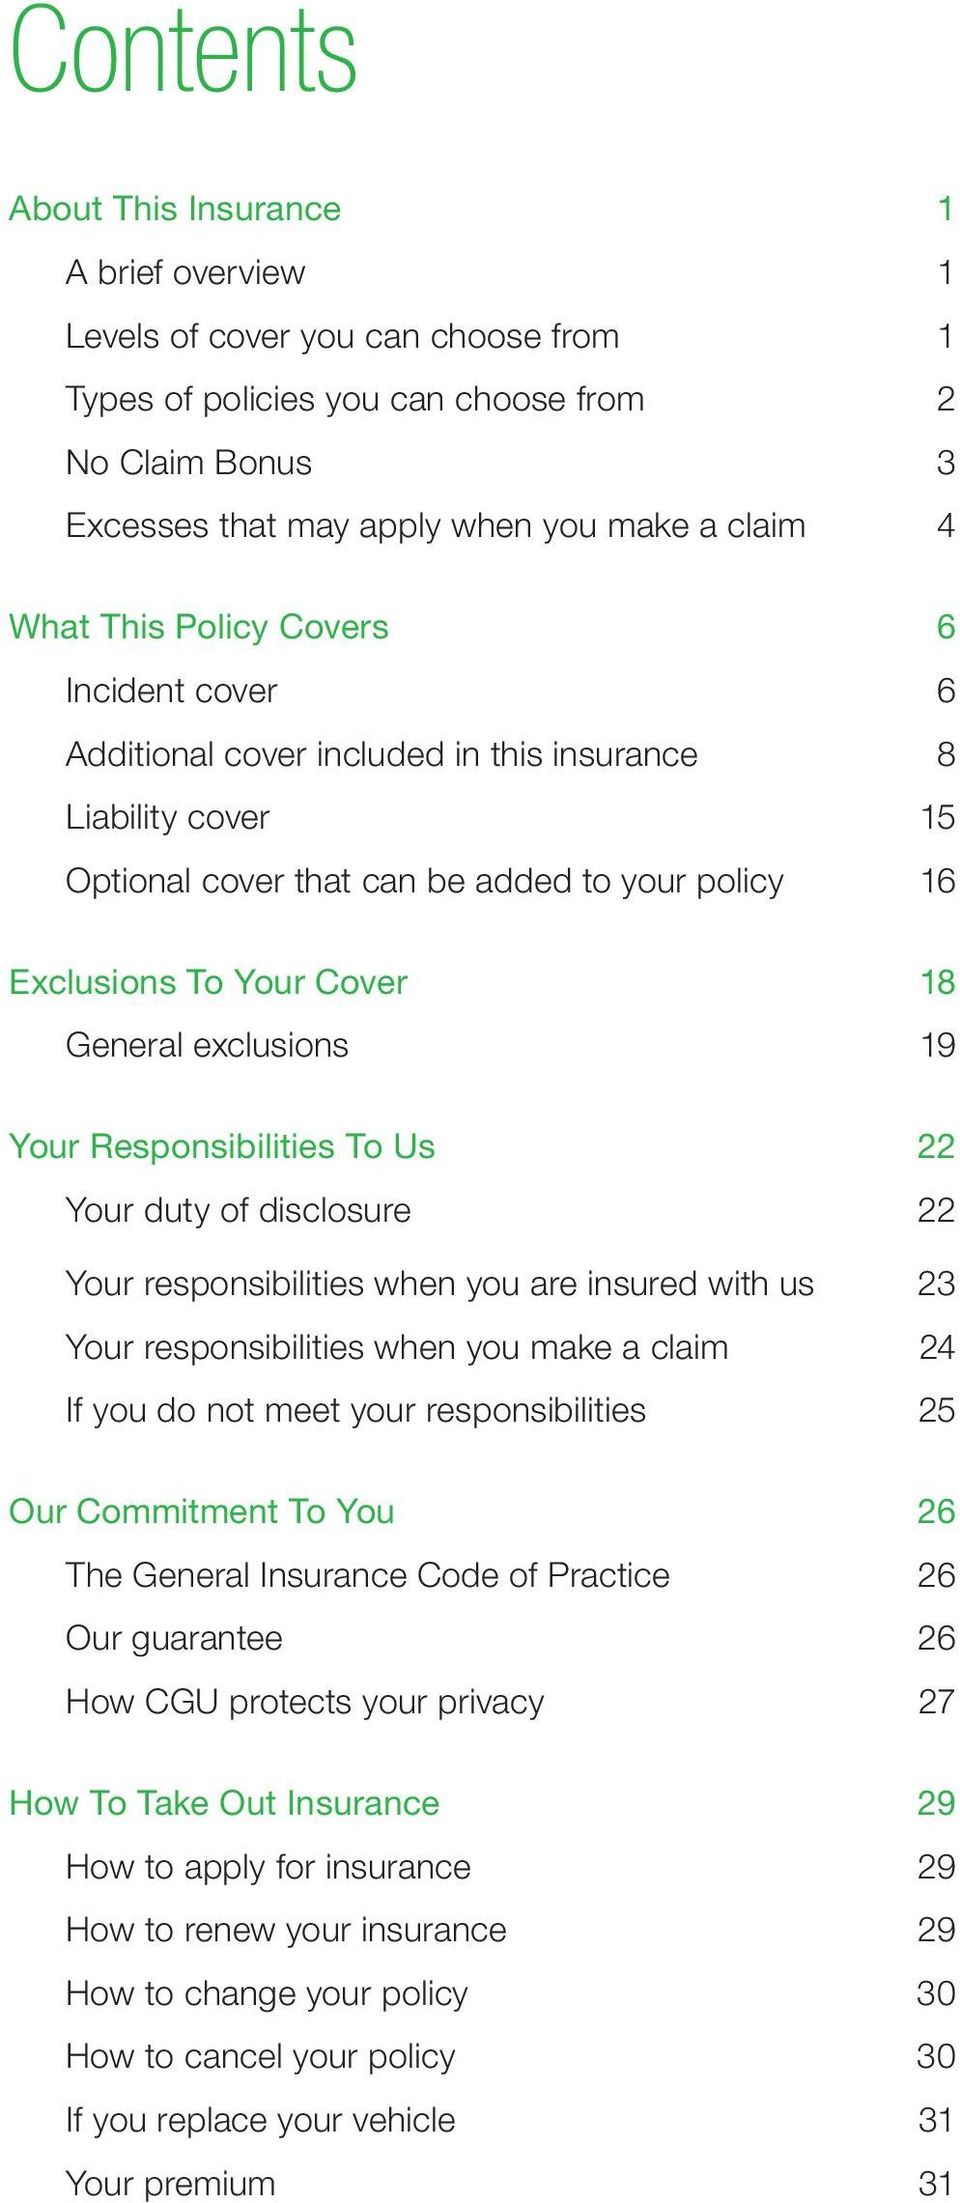 exclusions 19 Your Responsibilities To Us 22 Your duty of disclosure 22 Your responsibilities when you are insured with us 23 Your responsibilities when you make a claim 24 If you do not meet your